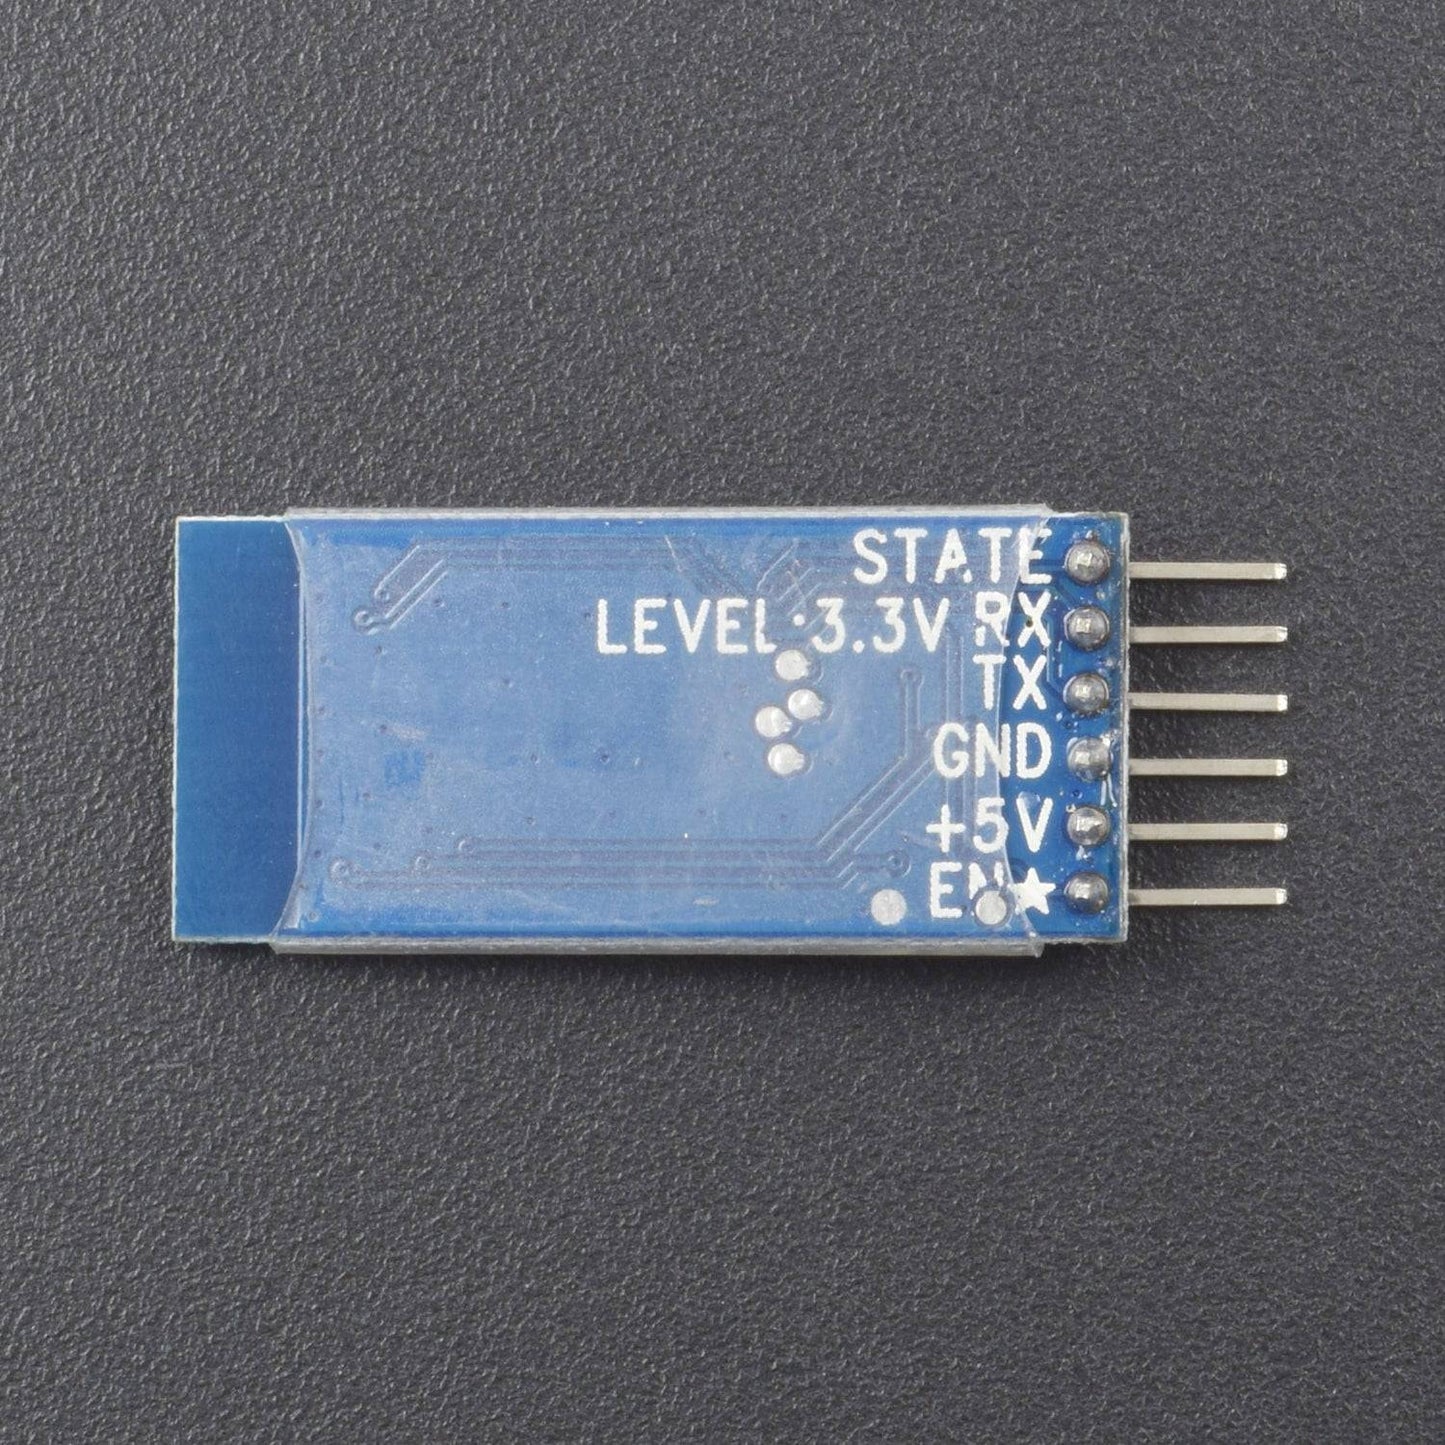 HC-05 Bluetooth Module with TTL Output - AA095 - REES52